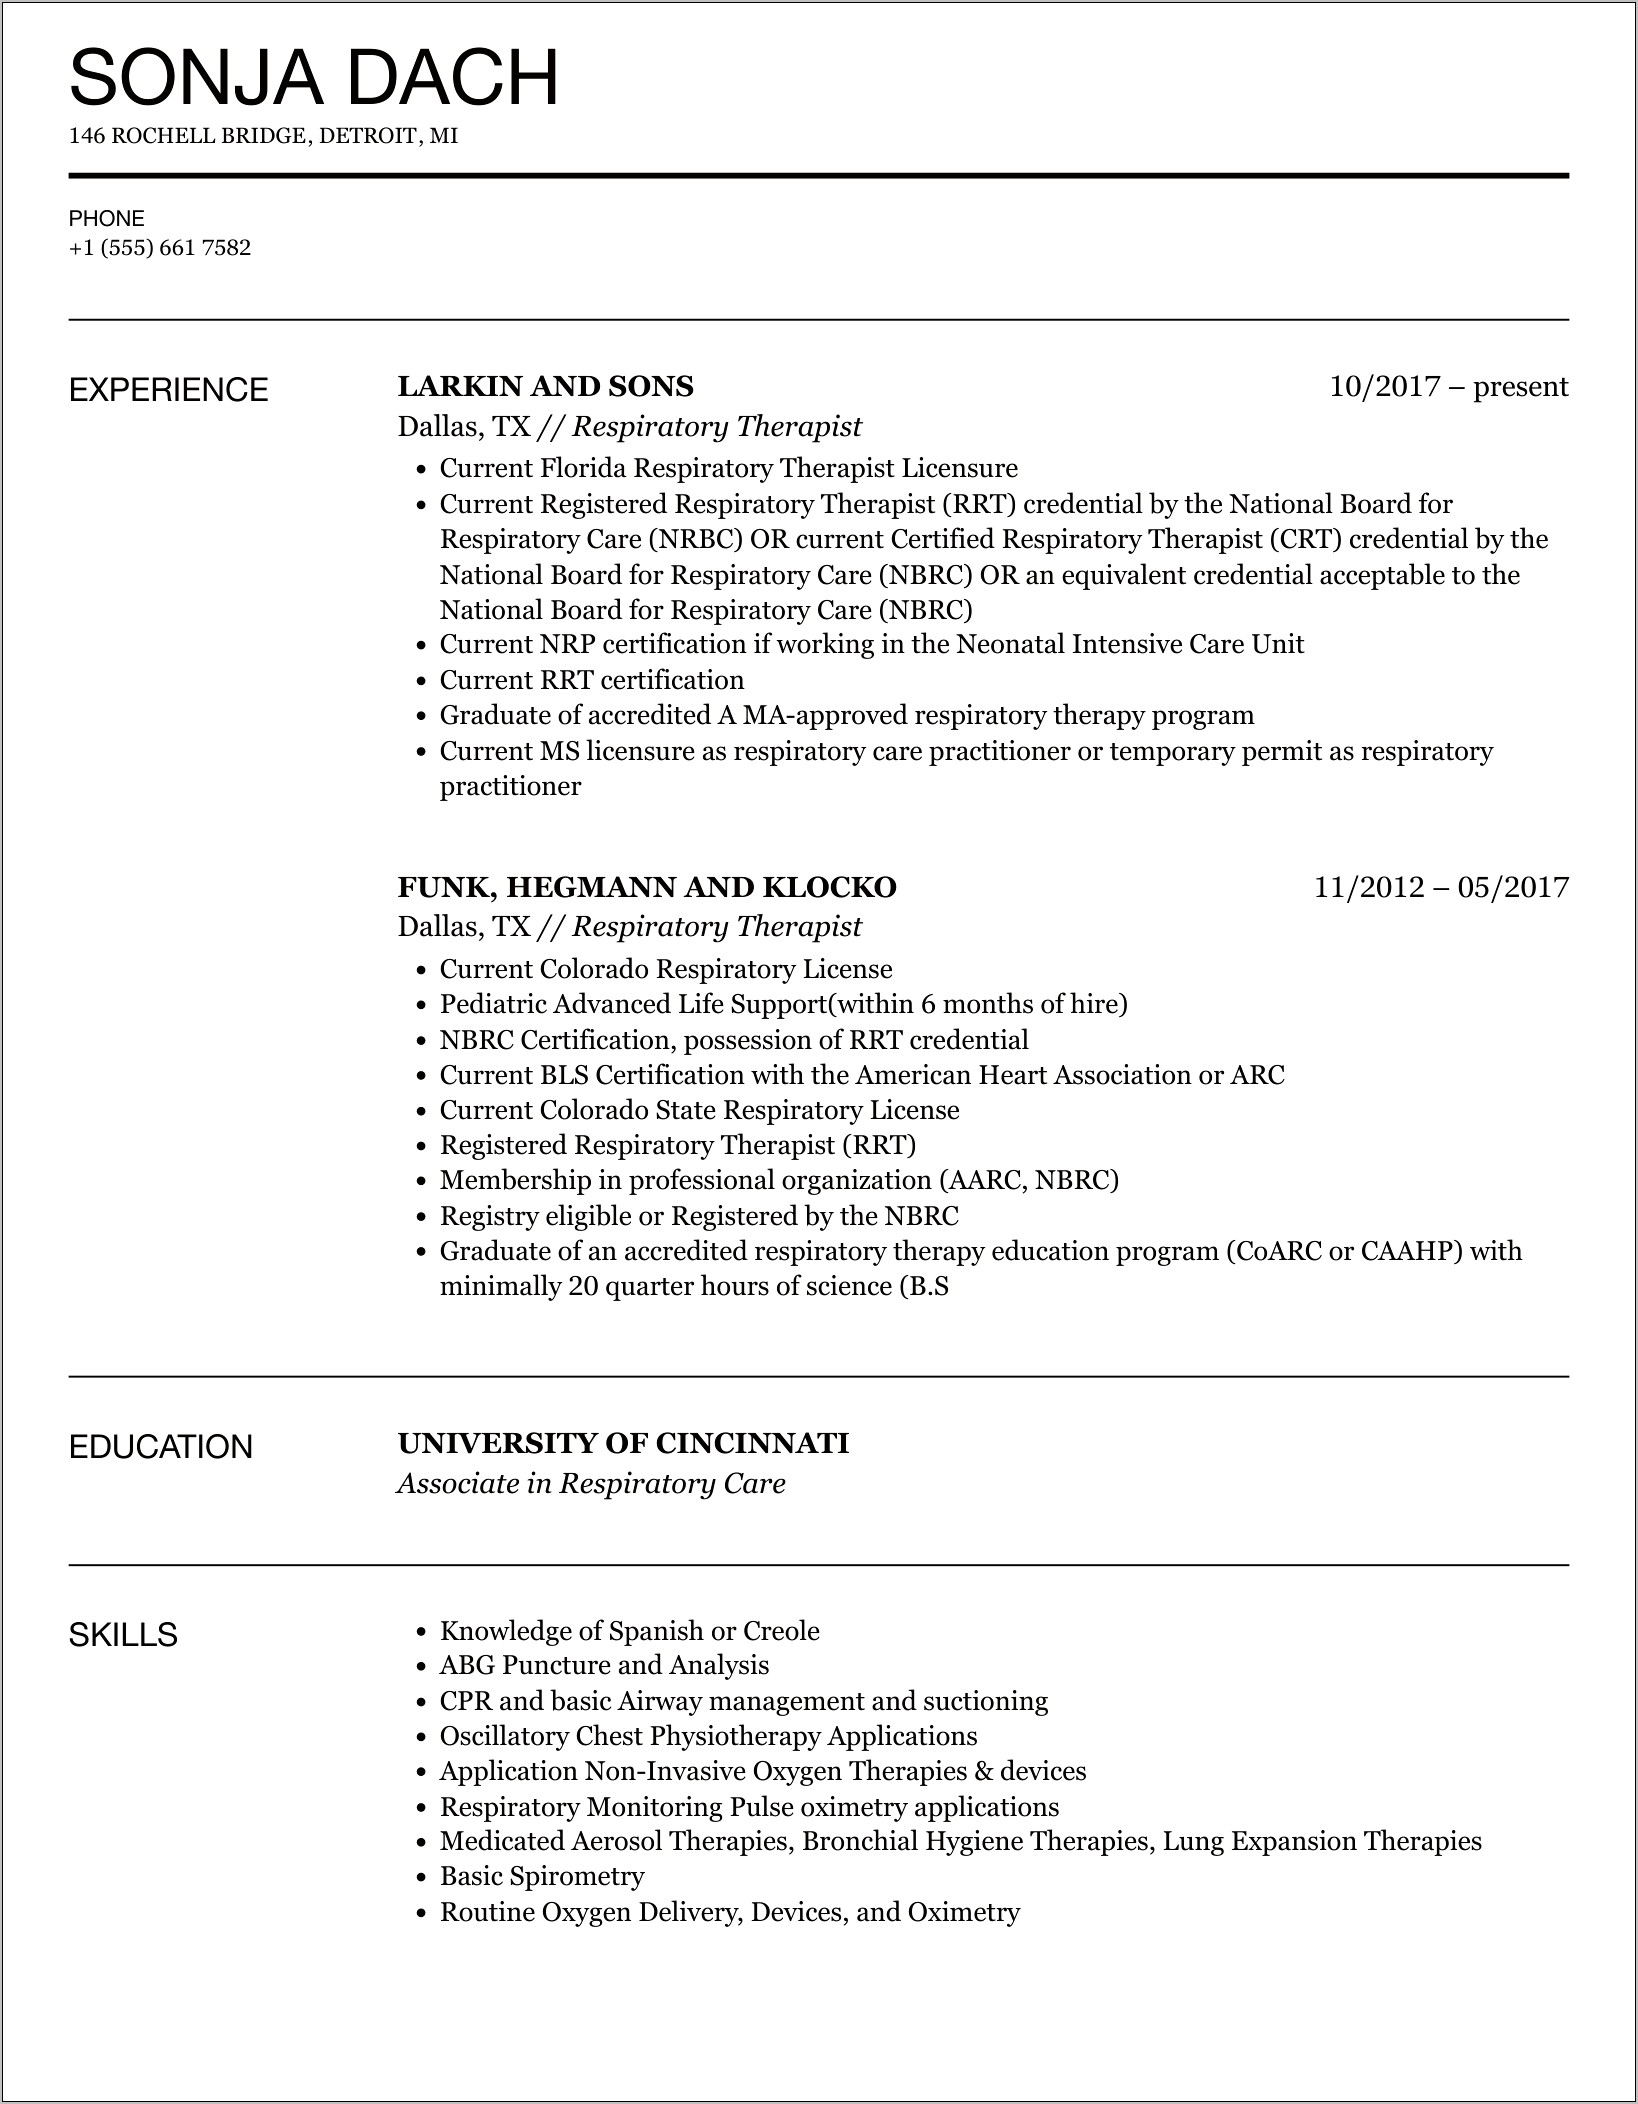 Resume Objective For Respiratory Therapist